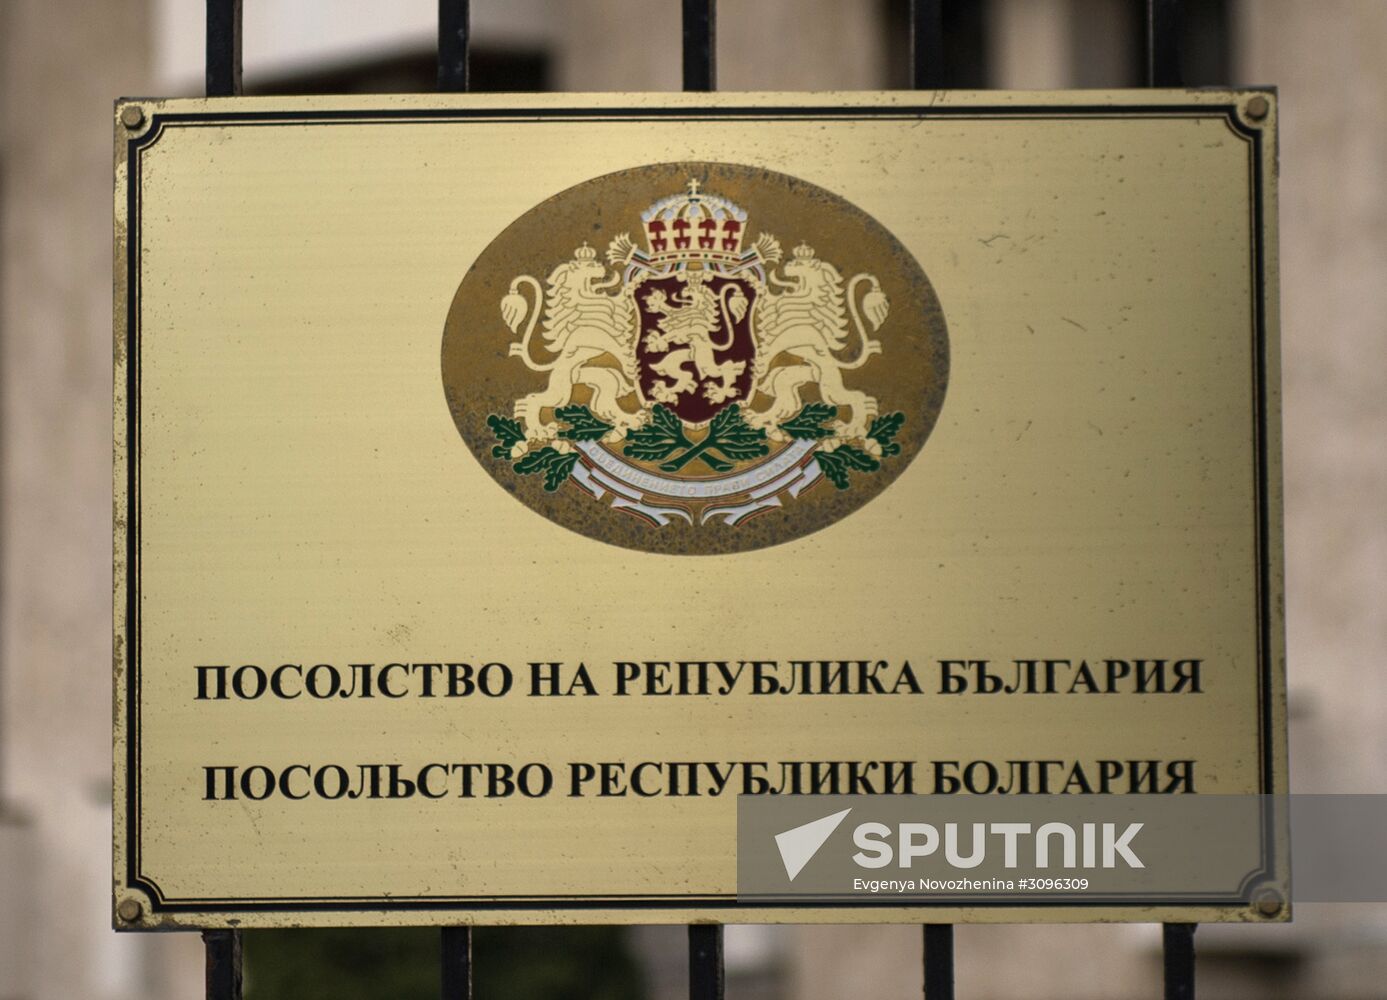 Embassy of Bulgaria in Russia, Moscow